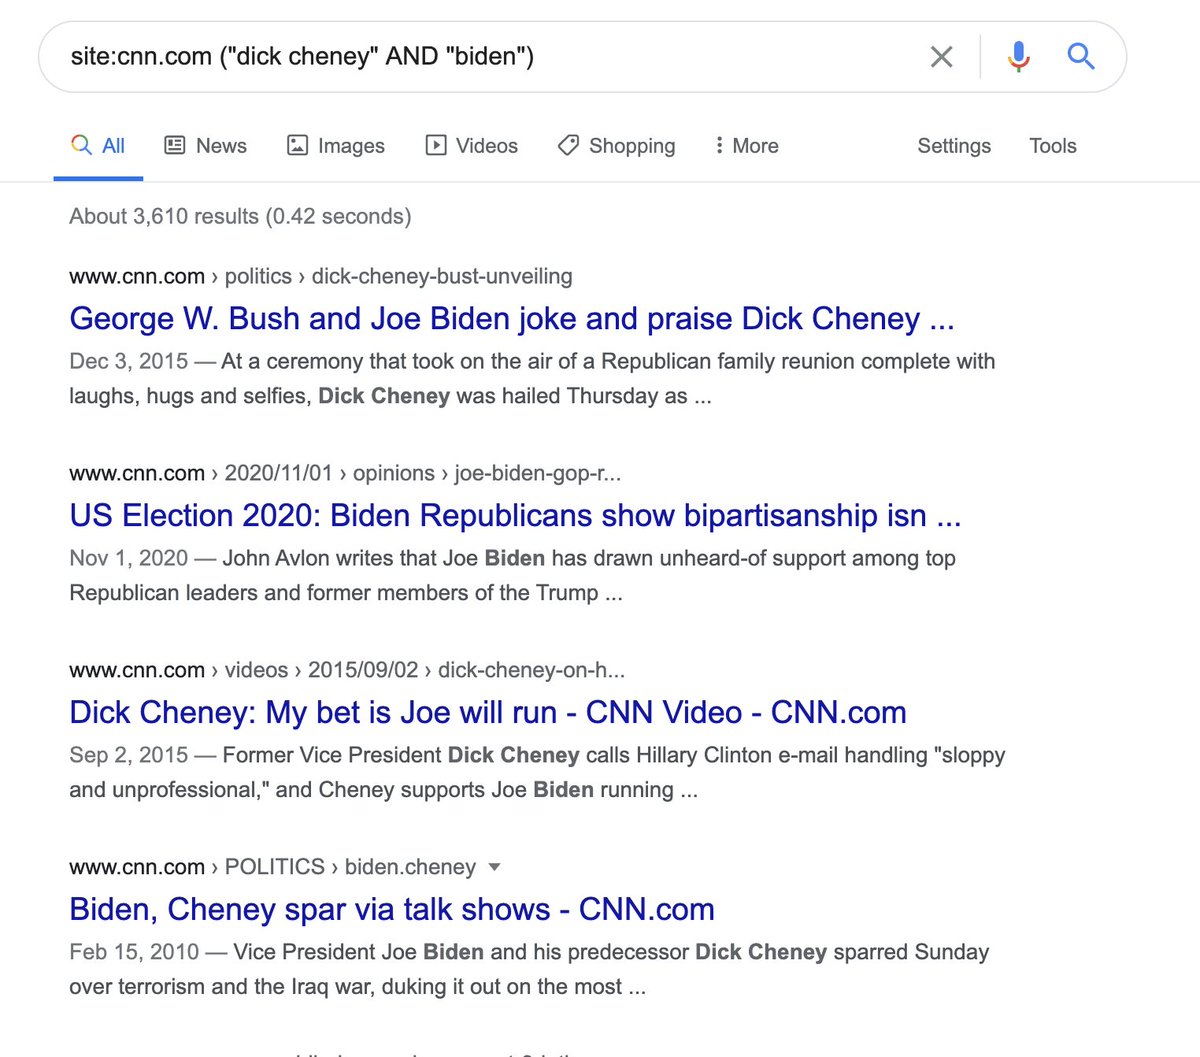 3. No, CNN did not report that Dick Cheney will be advising Biden on foreign policy. A quick search of the CNN website shows that the tweet, which stems from an unreliable account, is false.  https://www.buzzfeednews.com/article/janelytvynenko/post-elections-debunks#125934317